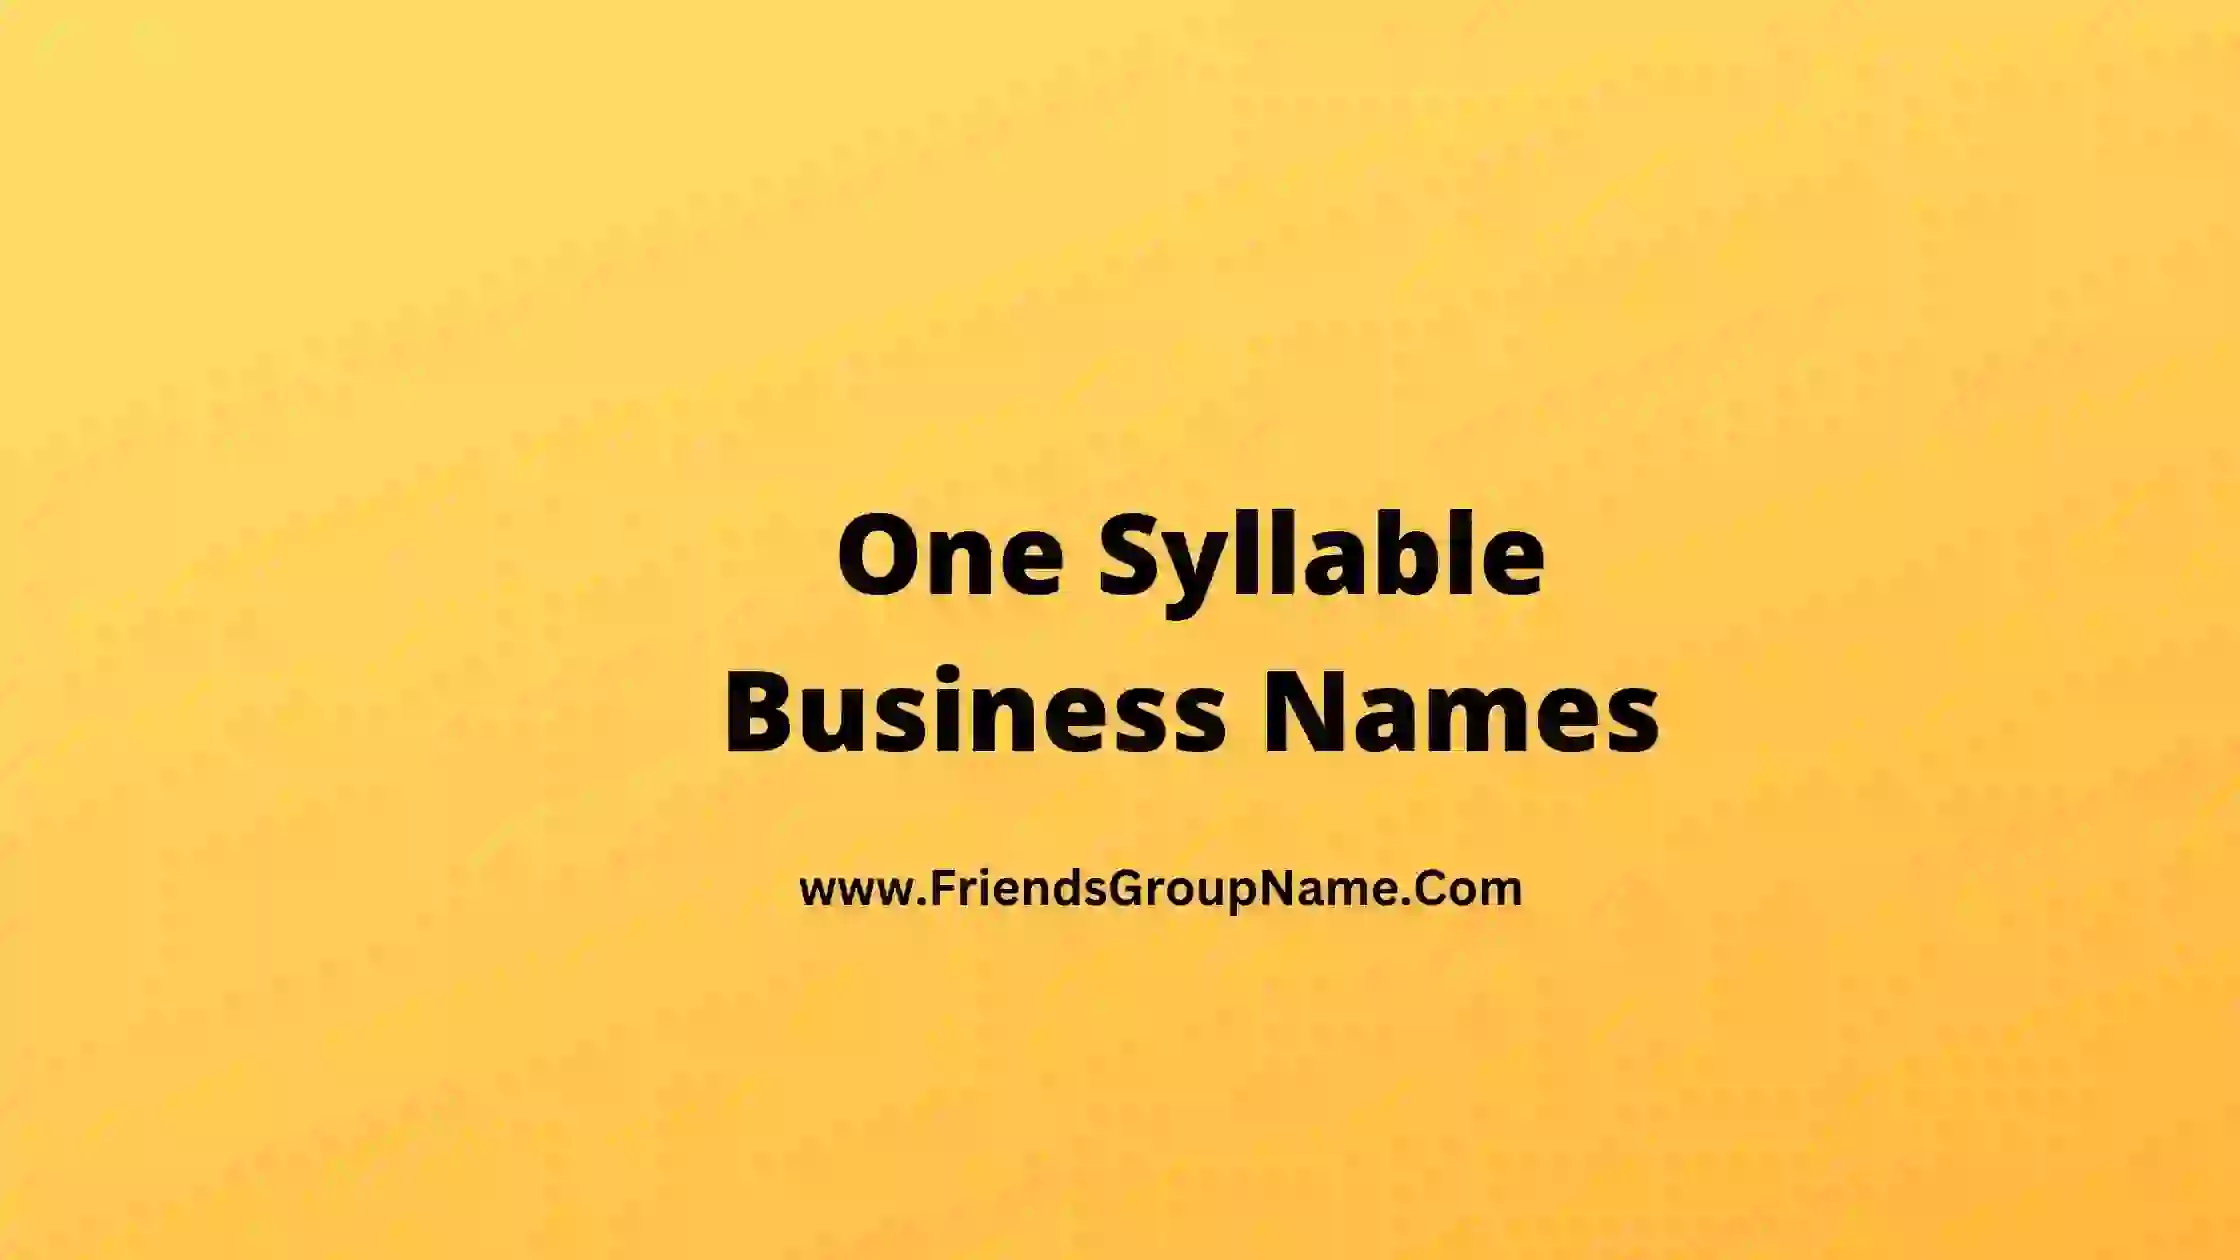 One Syllable Business Names